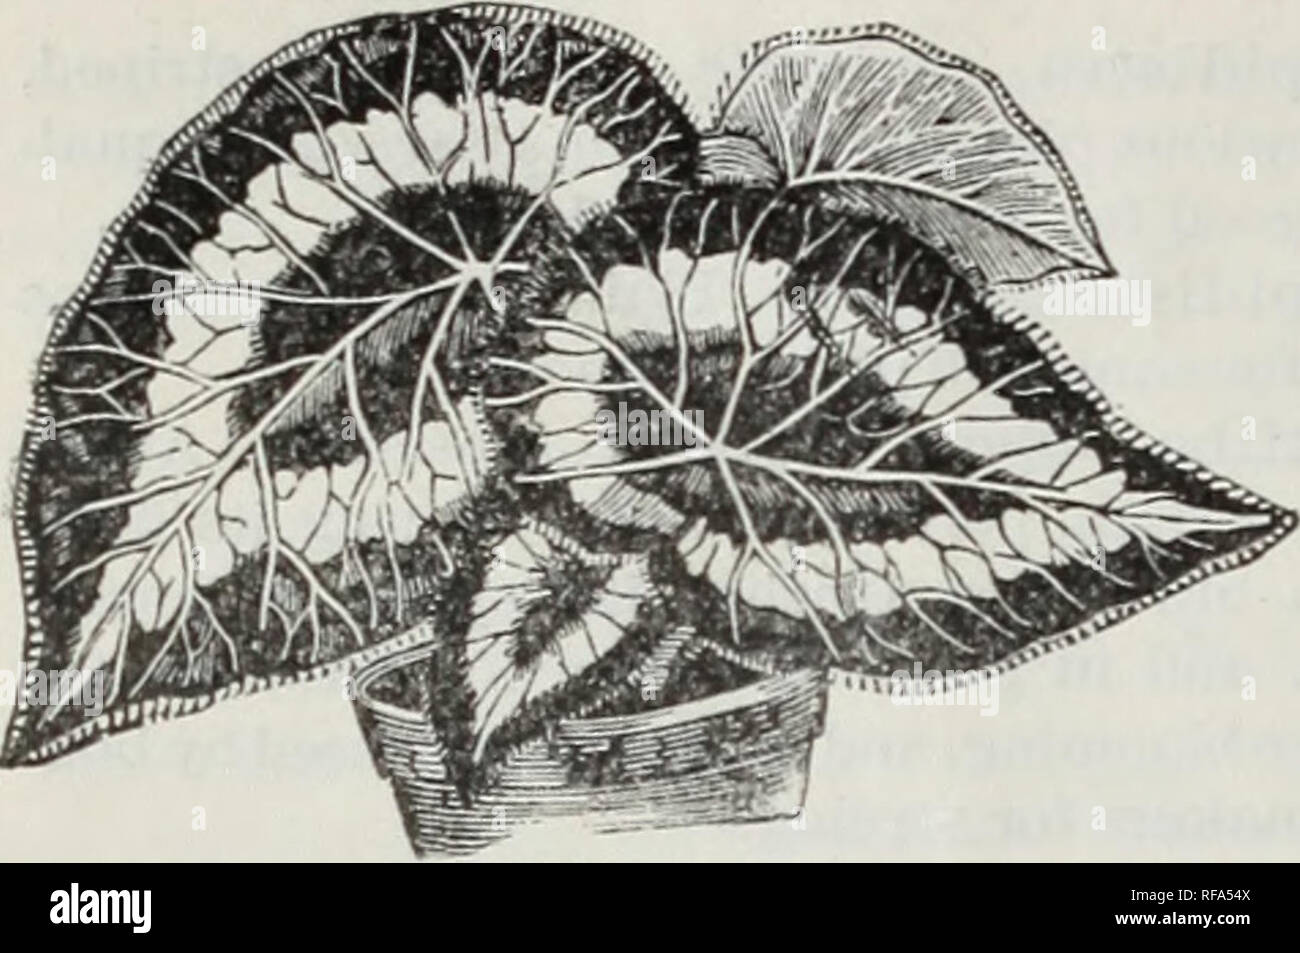 . Catalogue of dutch bulbs and other flowering roots : also seeds and plants for autumn planting and house decoration in winter. Flowers Seeds Catalogs; Bulbs (Plants) Catalogs. 18 D. M. FERRY &amp; CO S CATALOGUE OF. BEGONIA—Rex. like. It is a model of perfection. Nice, large, healthy |ilants 50 cents to fl.OO. Begonia, Sarmdersonii. Scarlet crimson. Bouvardia, Valuabl • as Winter-blooming l)lants. equally desirable for bedding. Beginning to bloom in August, they continue until frost. 30 cents each. Bouvardia, L'entha. Dazzling scarlet: small and compact. Bouvardia, Vreelandii. Pure white. Bo Stock Photo